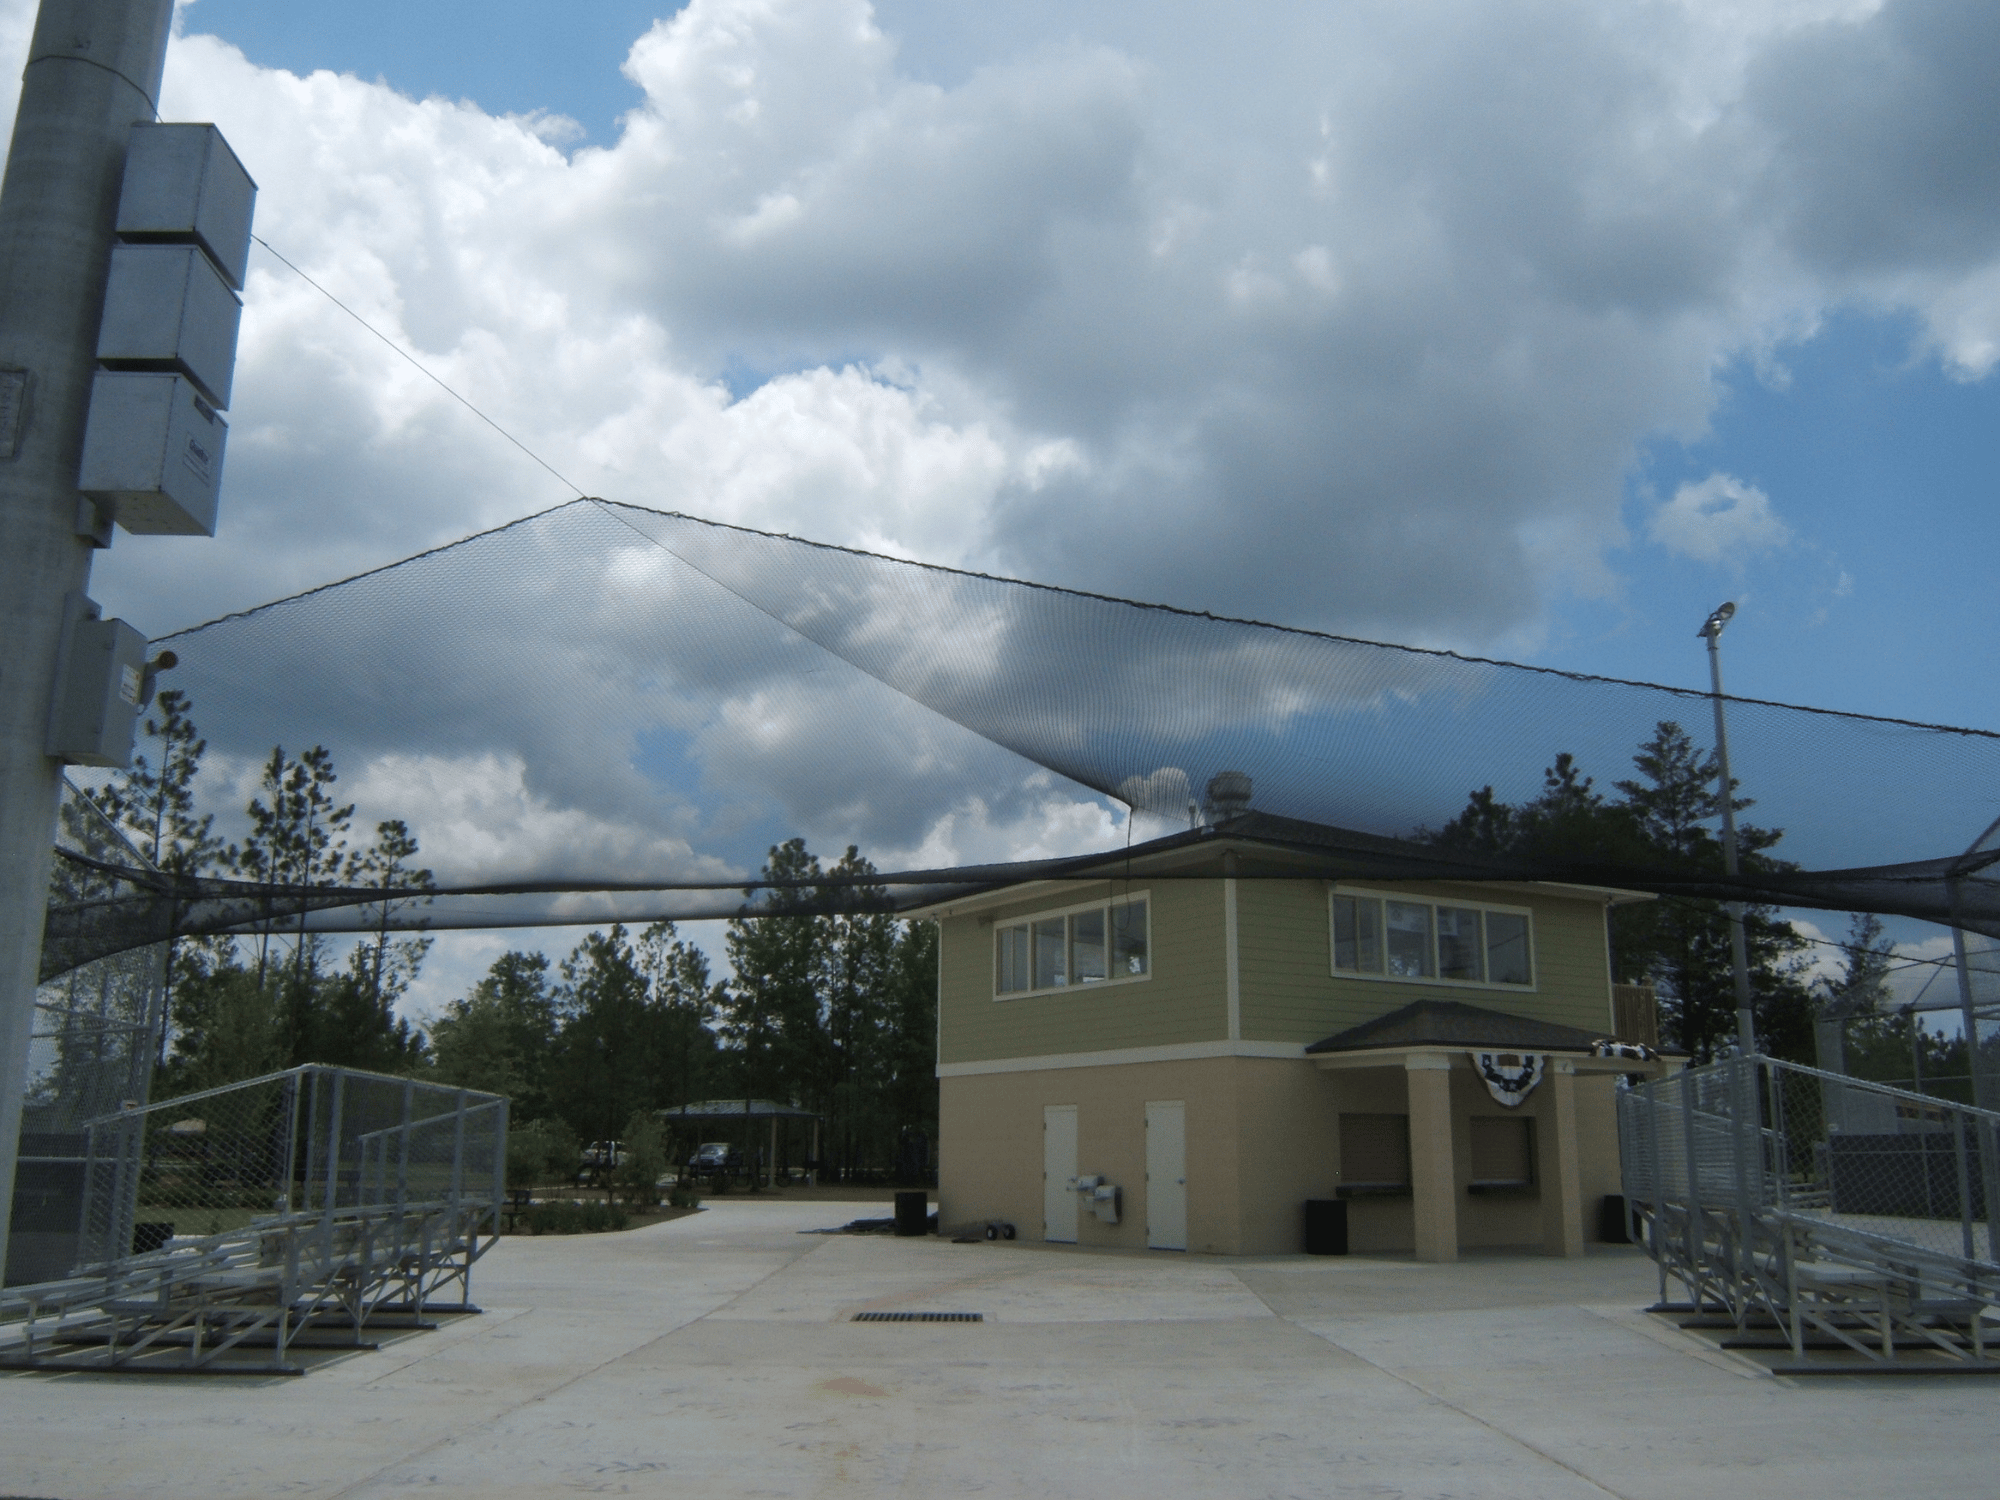 Baseball field foul ball territory netting above bleachers and connected to center building